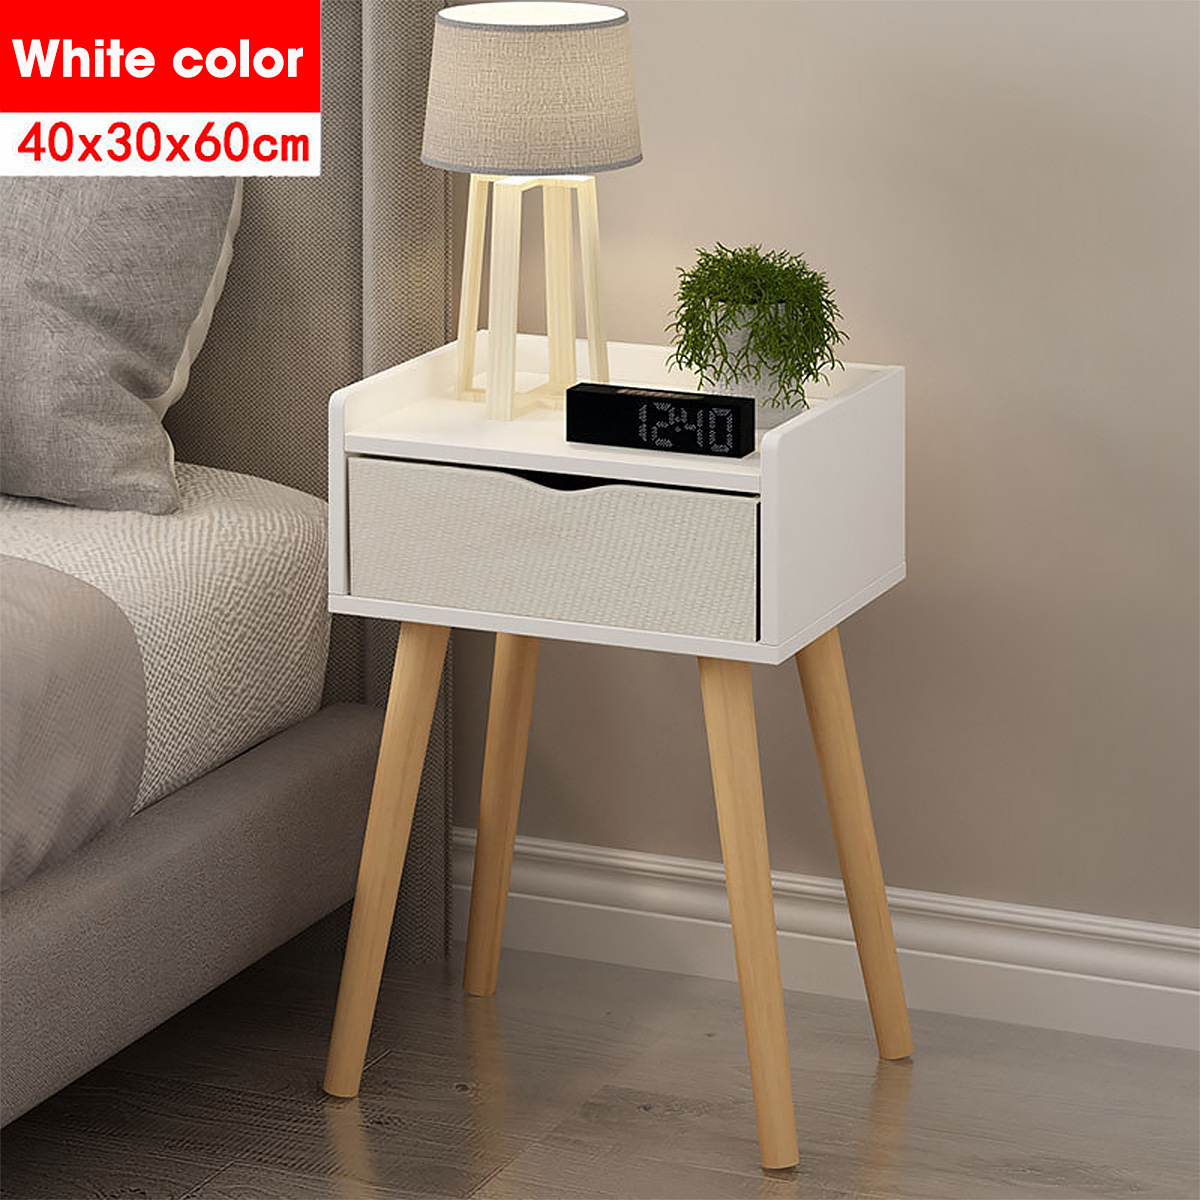 White Bedside Table Nightstand Telephone/Sofa End Table 40x30x60cm 